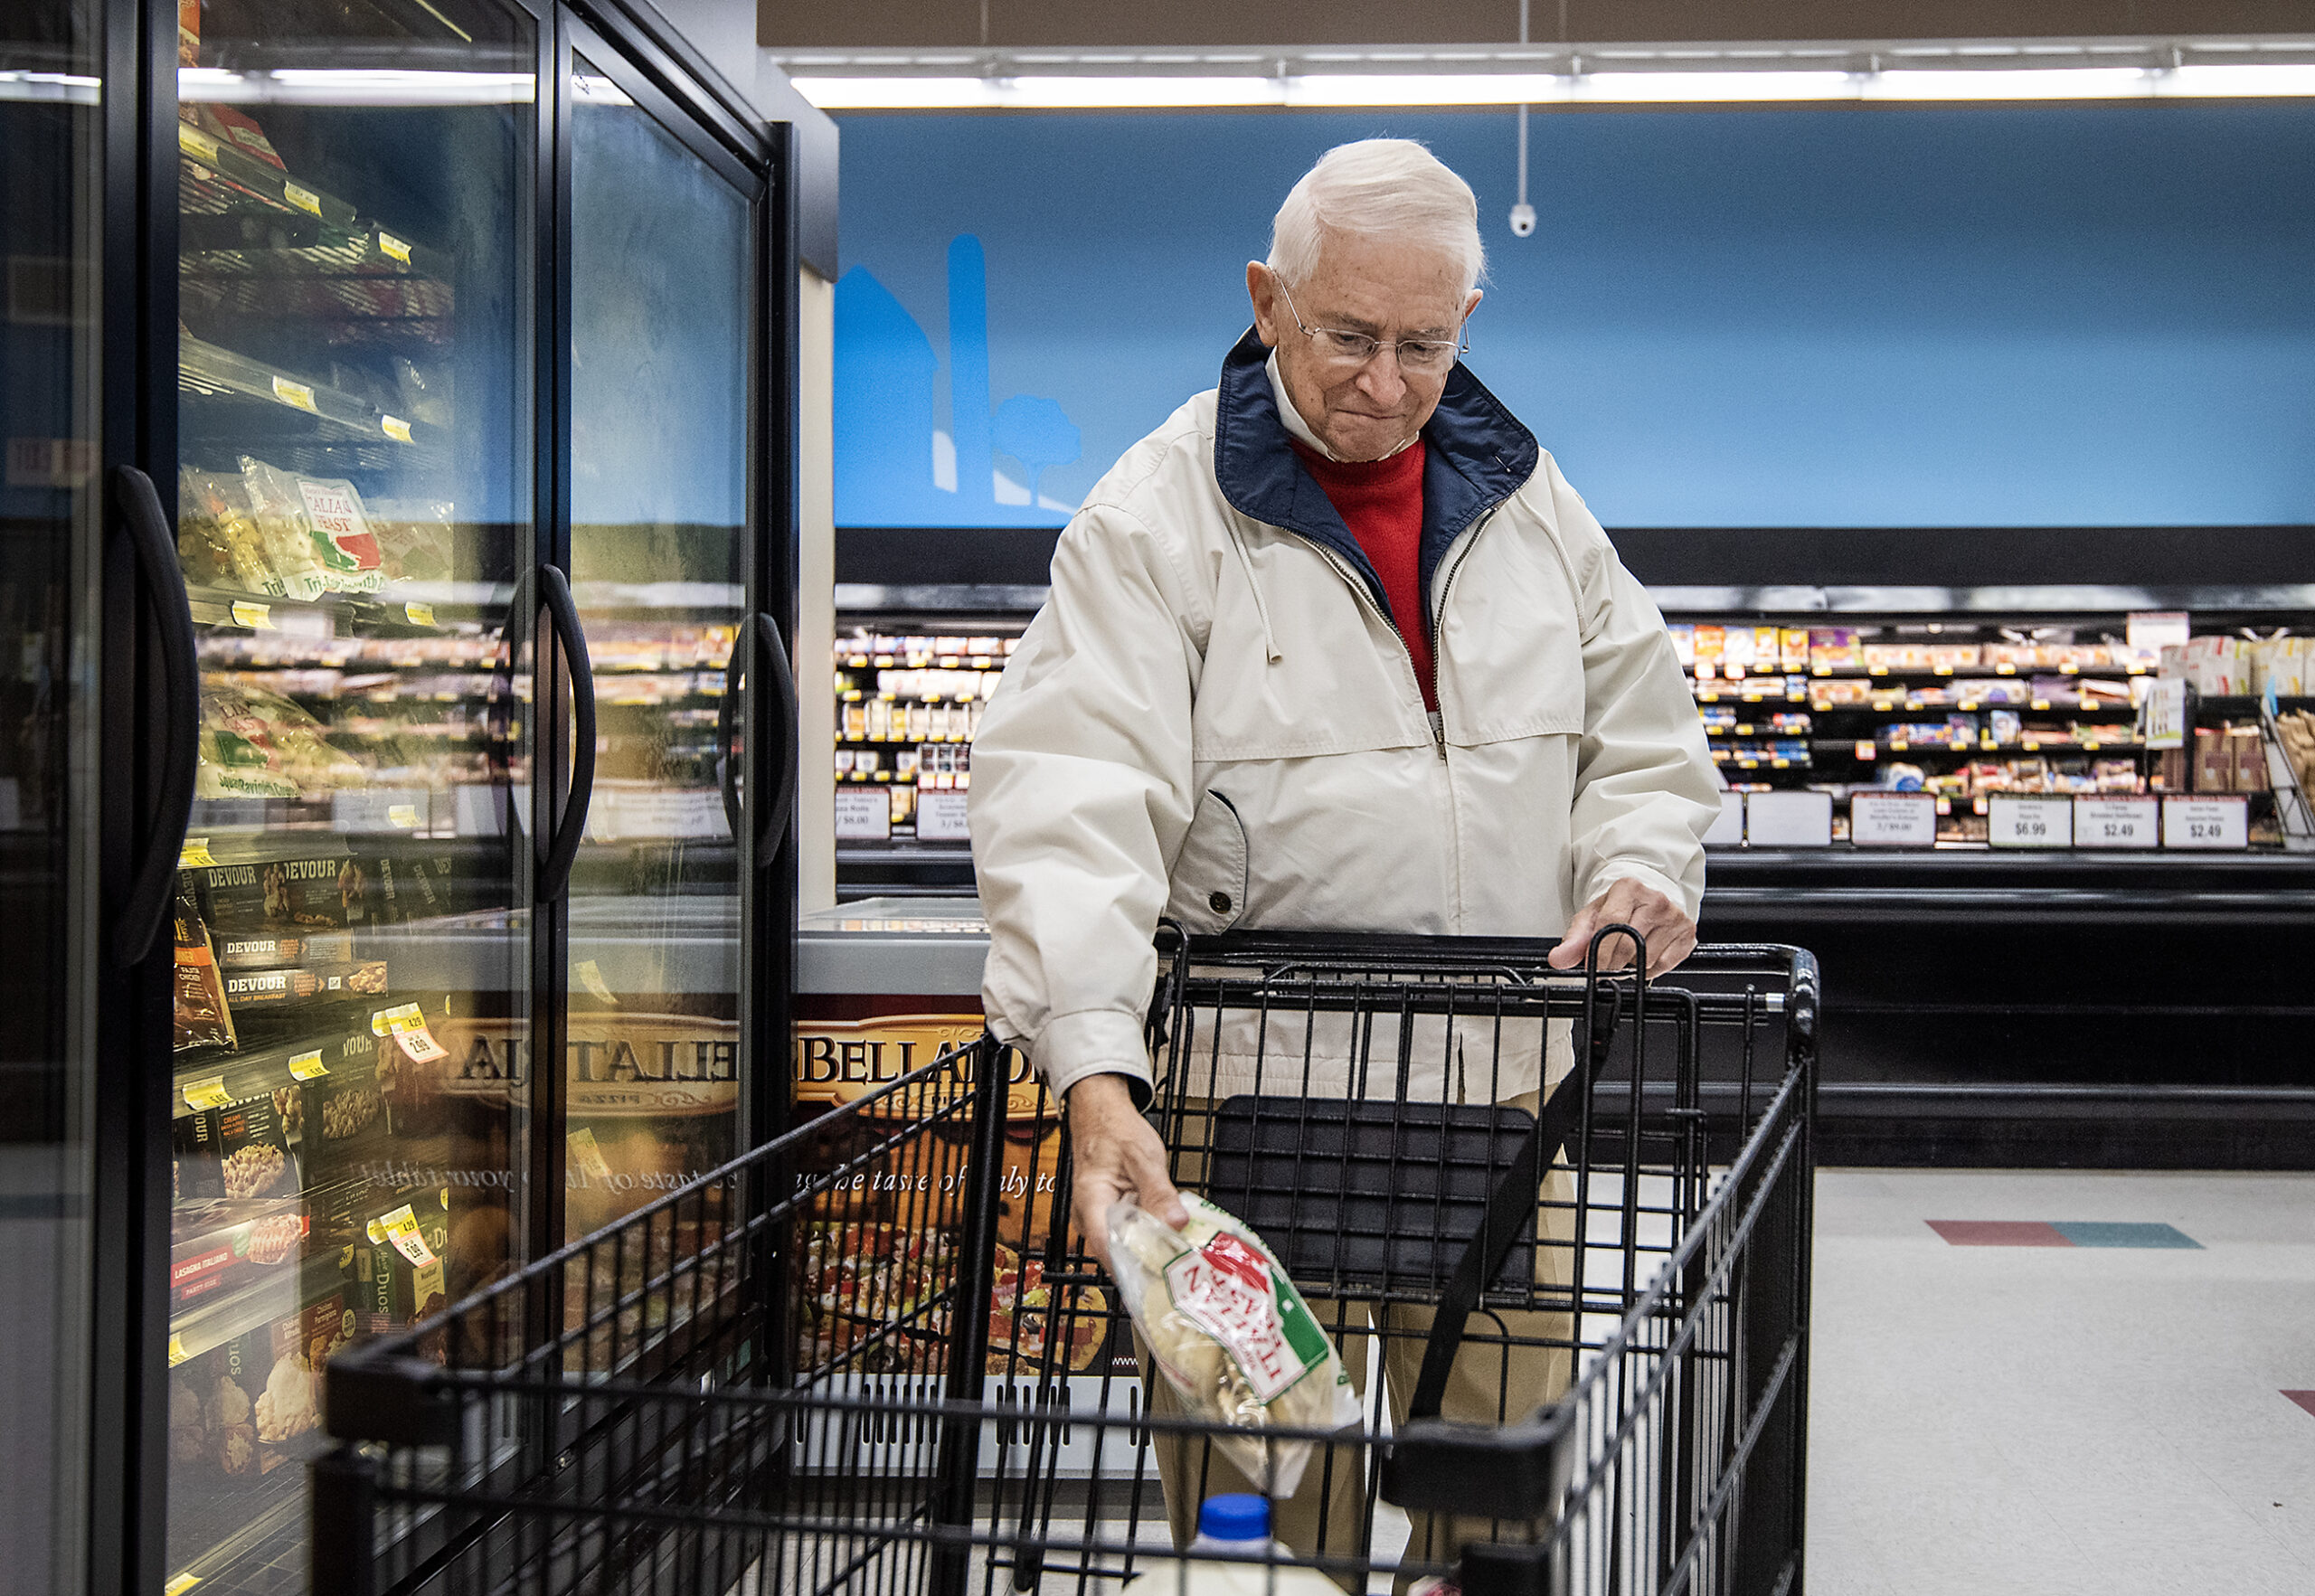 A man in a jacket puts a package into a cart in the frozen food aisle.